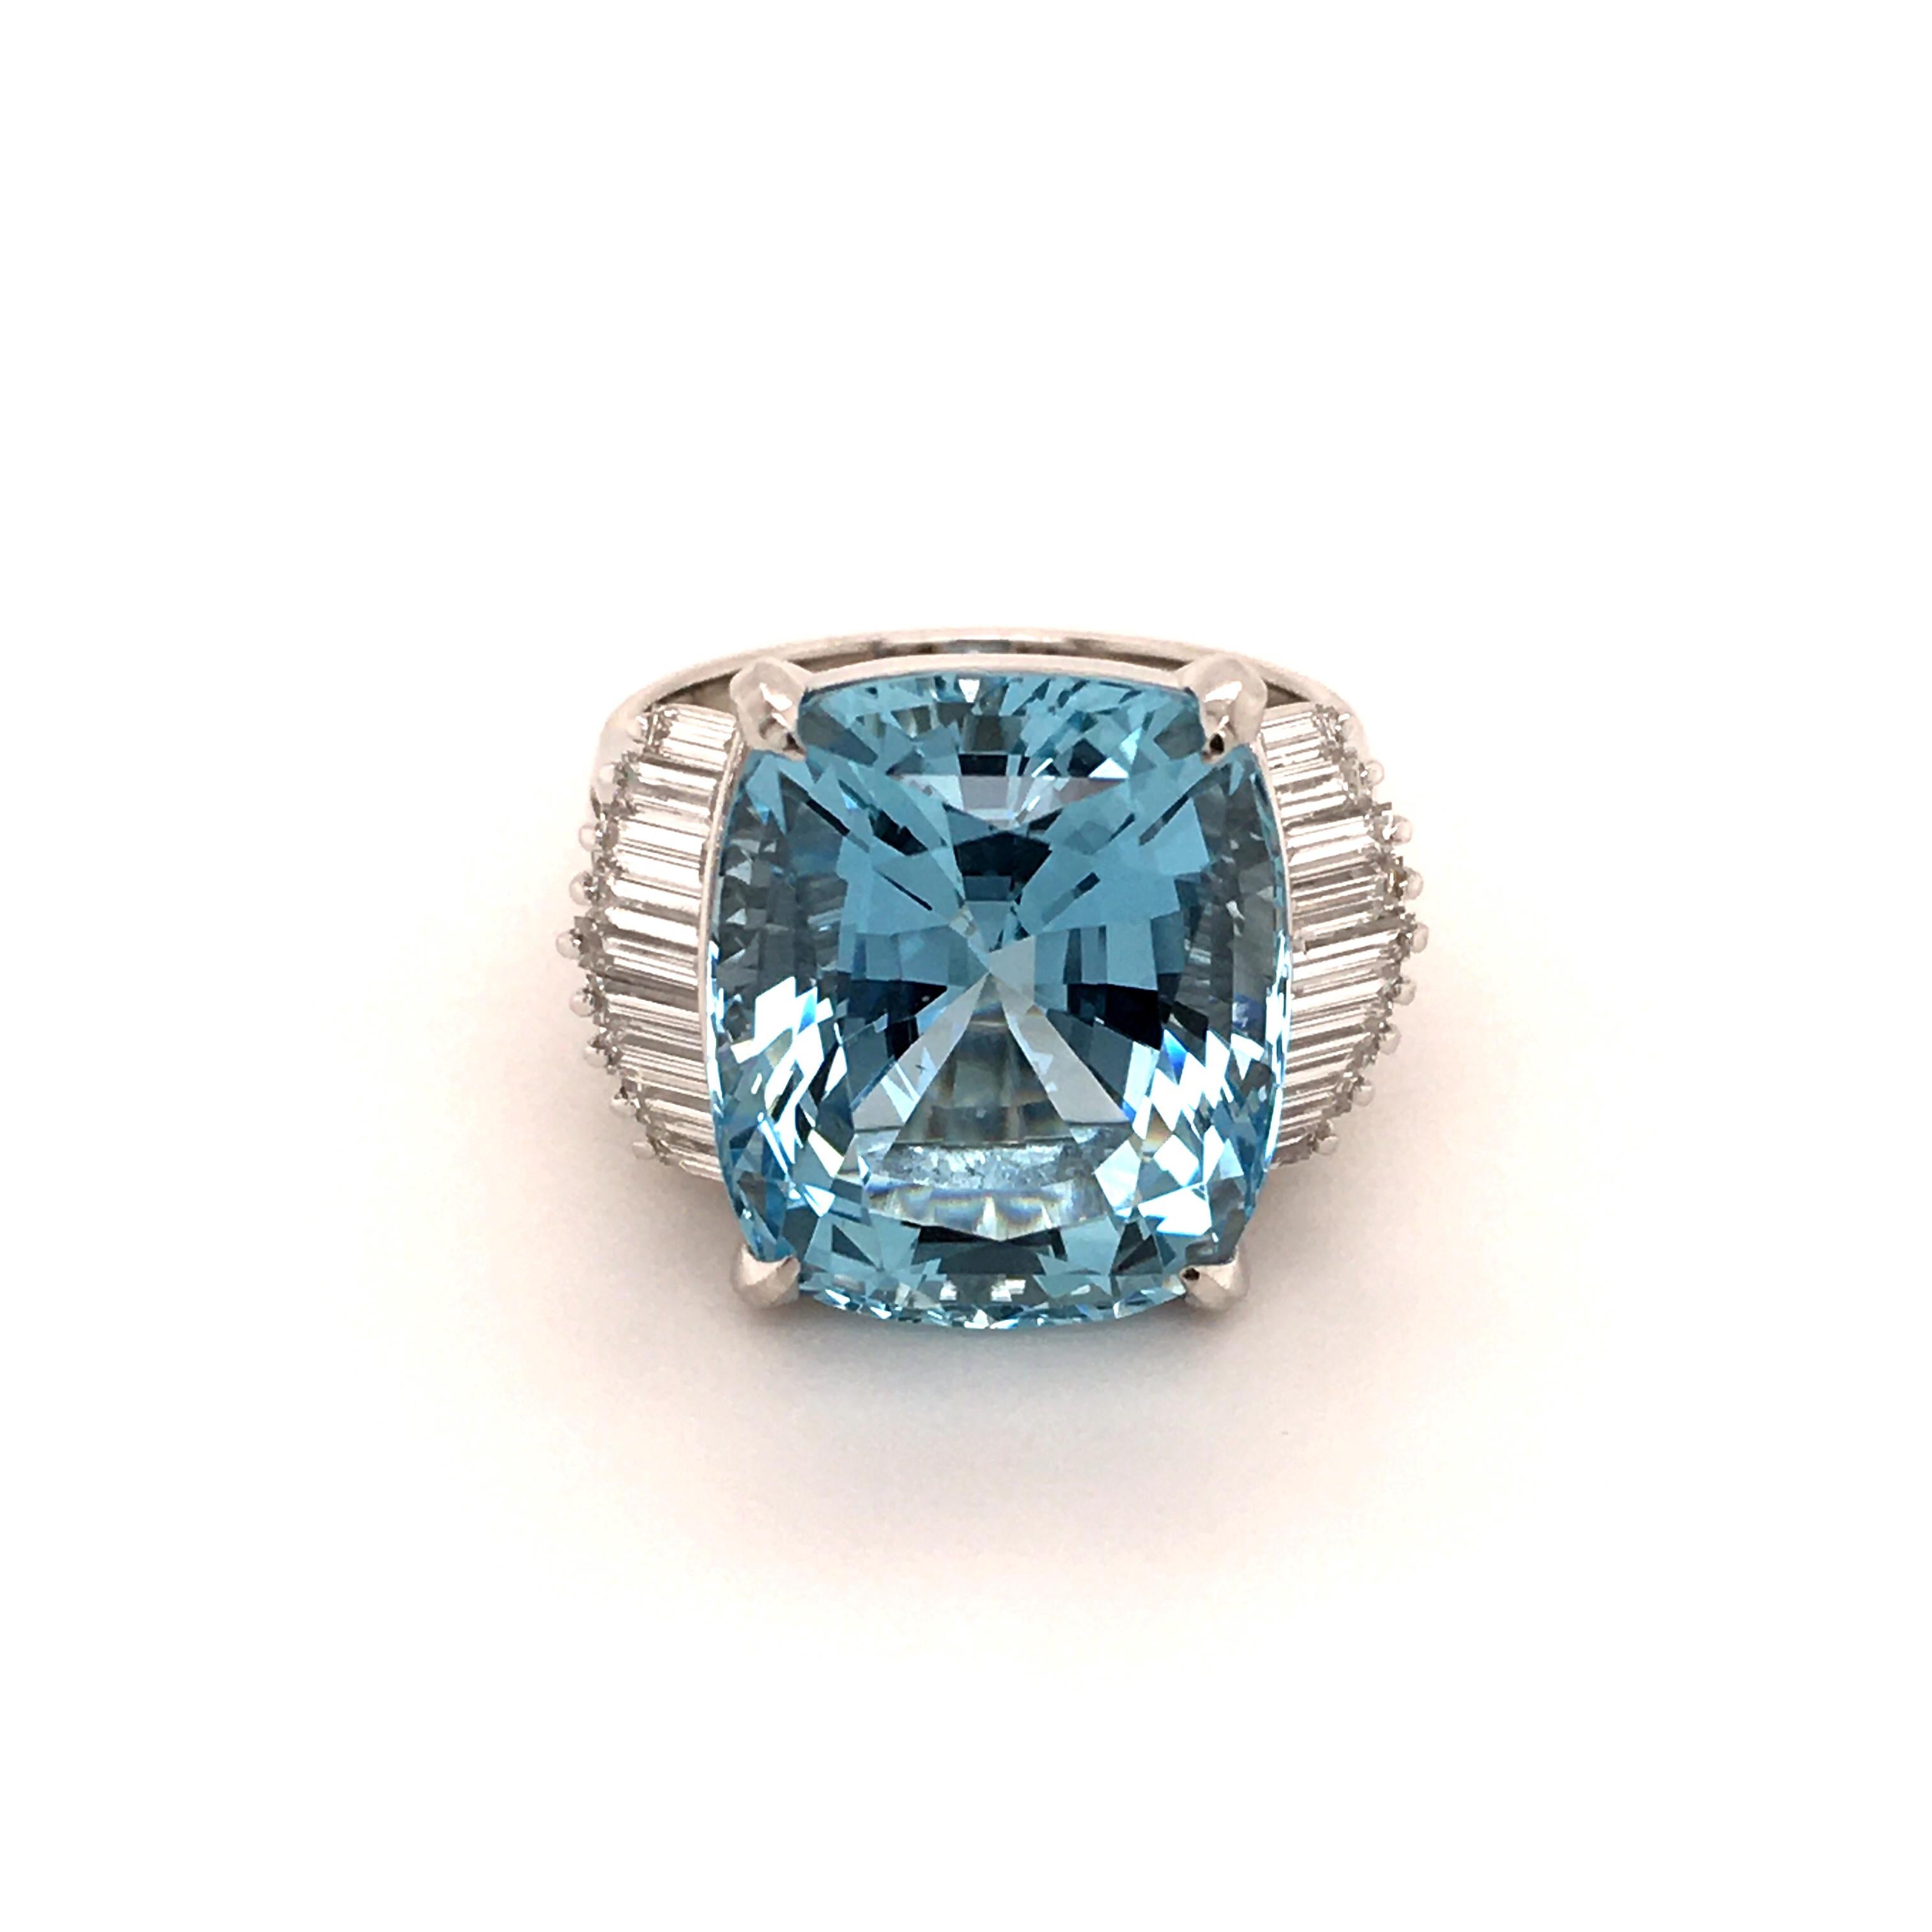 A superbly cut 11.89 carats Aquamarine adorns this ring in 900 Platinum. The cushion shaped center stone is flanked by 18 baguette shaped diamonds of G/H color and vs clarity, total weight 0.83 carats.

Size: 53.5 (EU) / 6.75 (US)
Engraving: 11.89